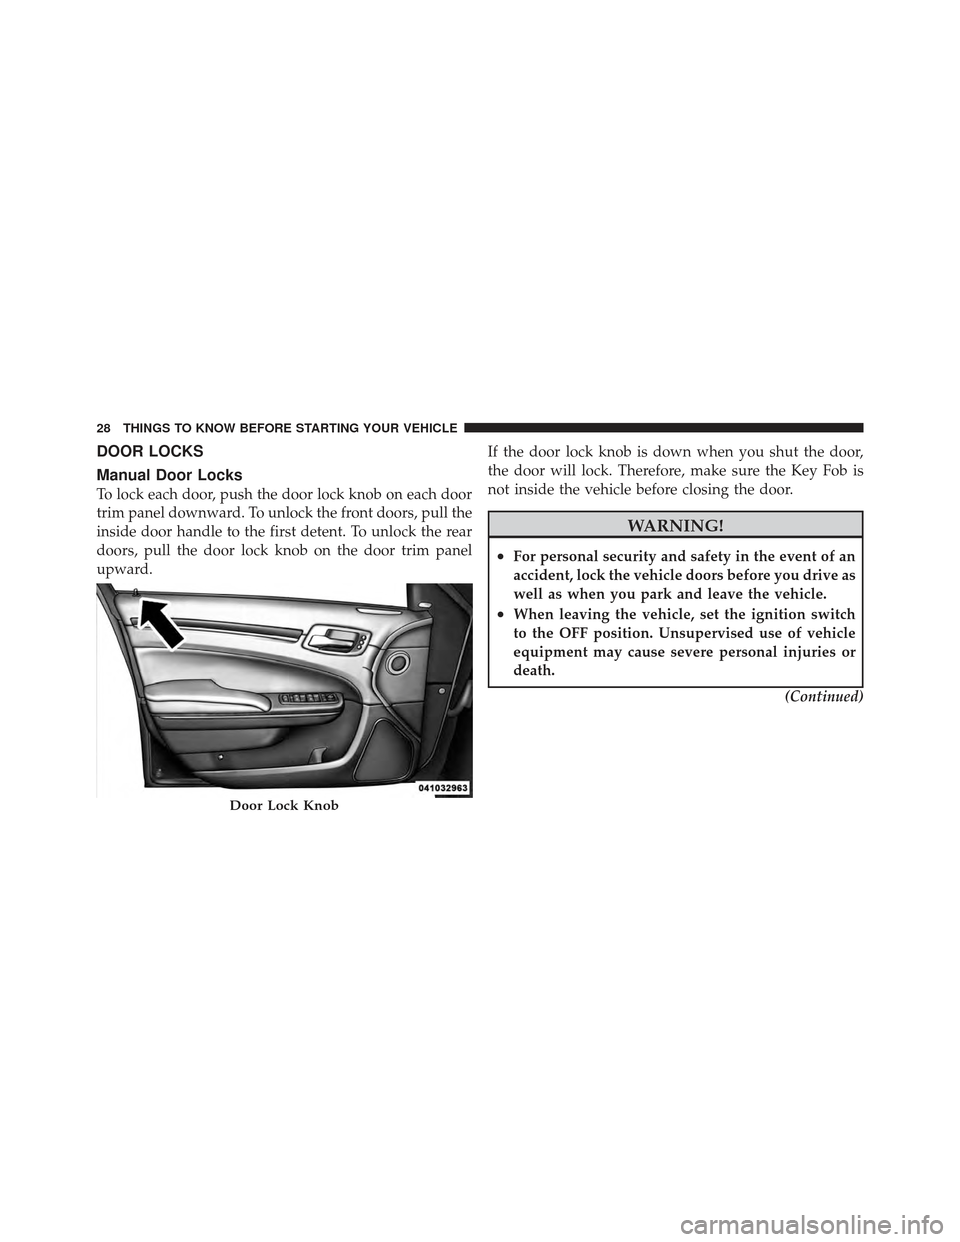 CHRYSLER 300 2011 2.G Owners Manual DOOR LOCKS
Manual Door Locks
To lock each door, push the door lock knob on each door
trim panel downward. To unlock the front doors, pull the
inside door handle to the first detent. To unlock the rear